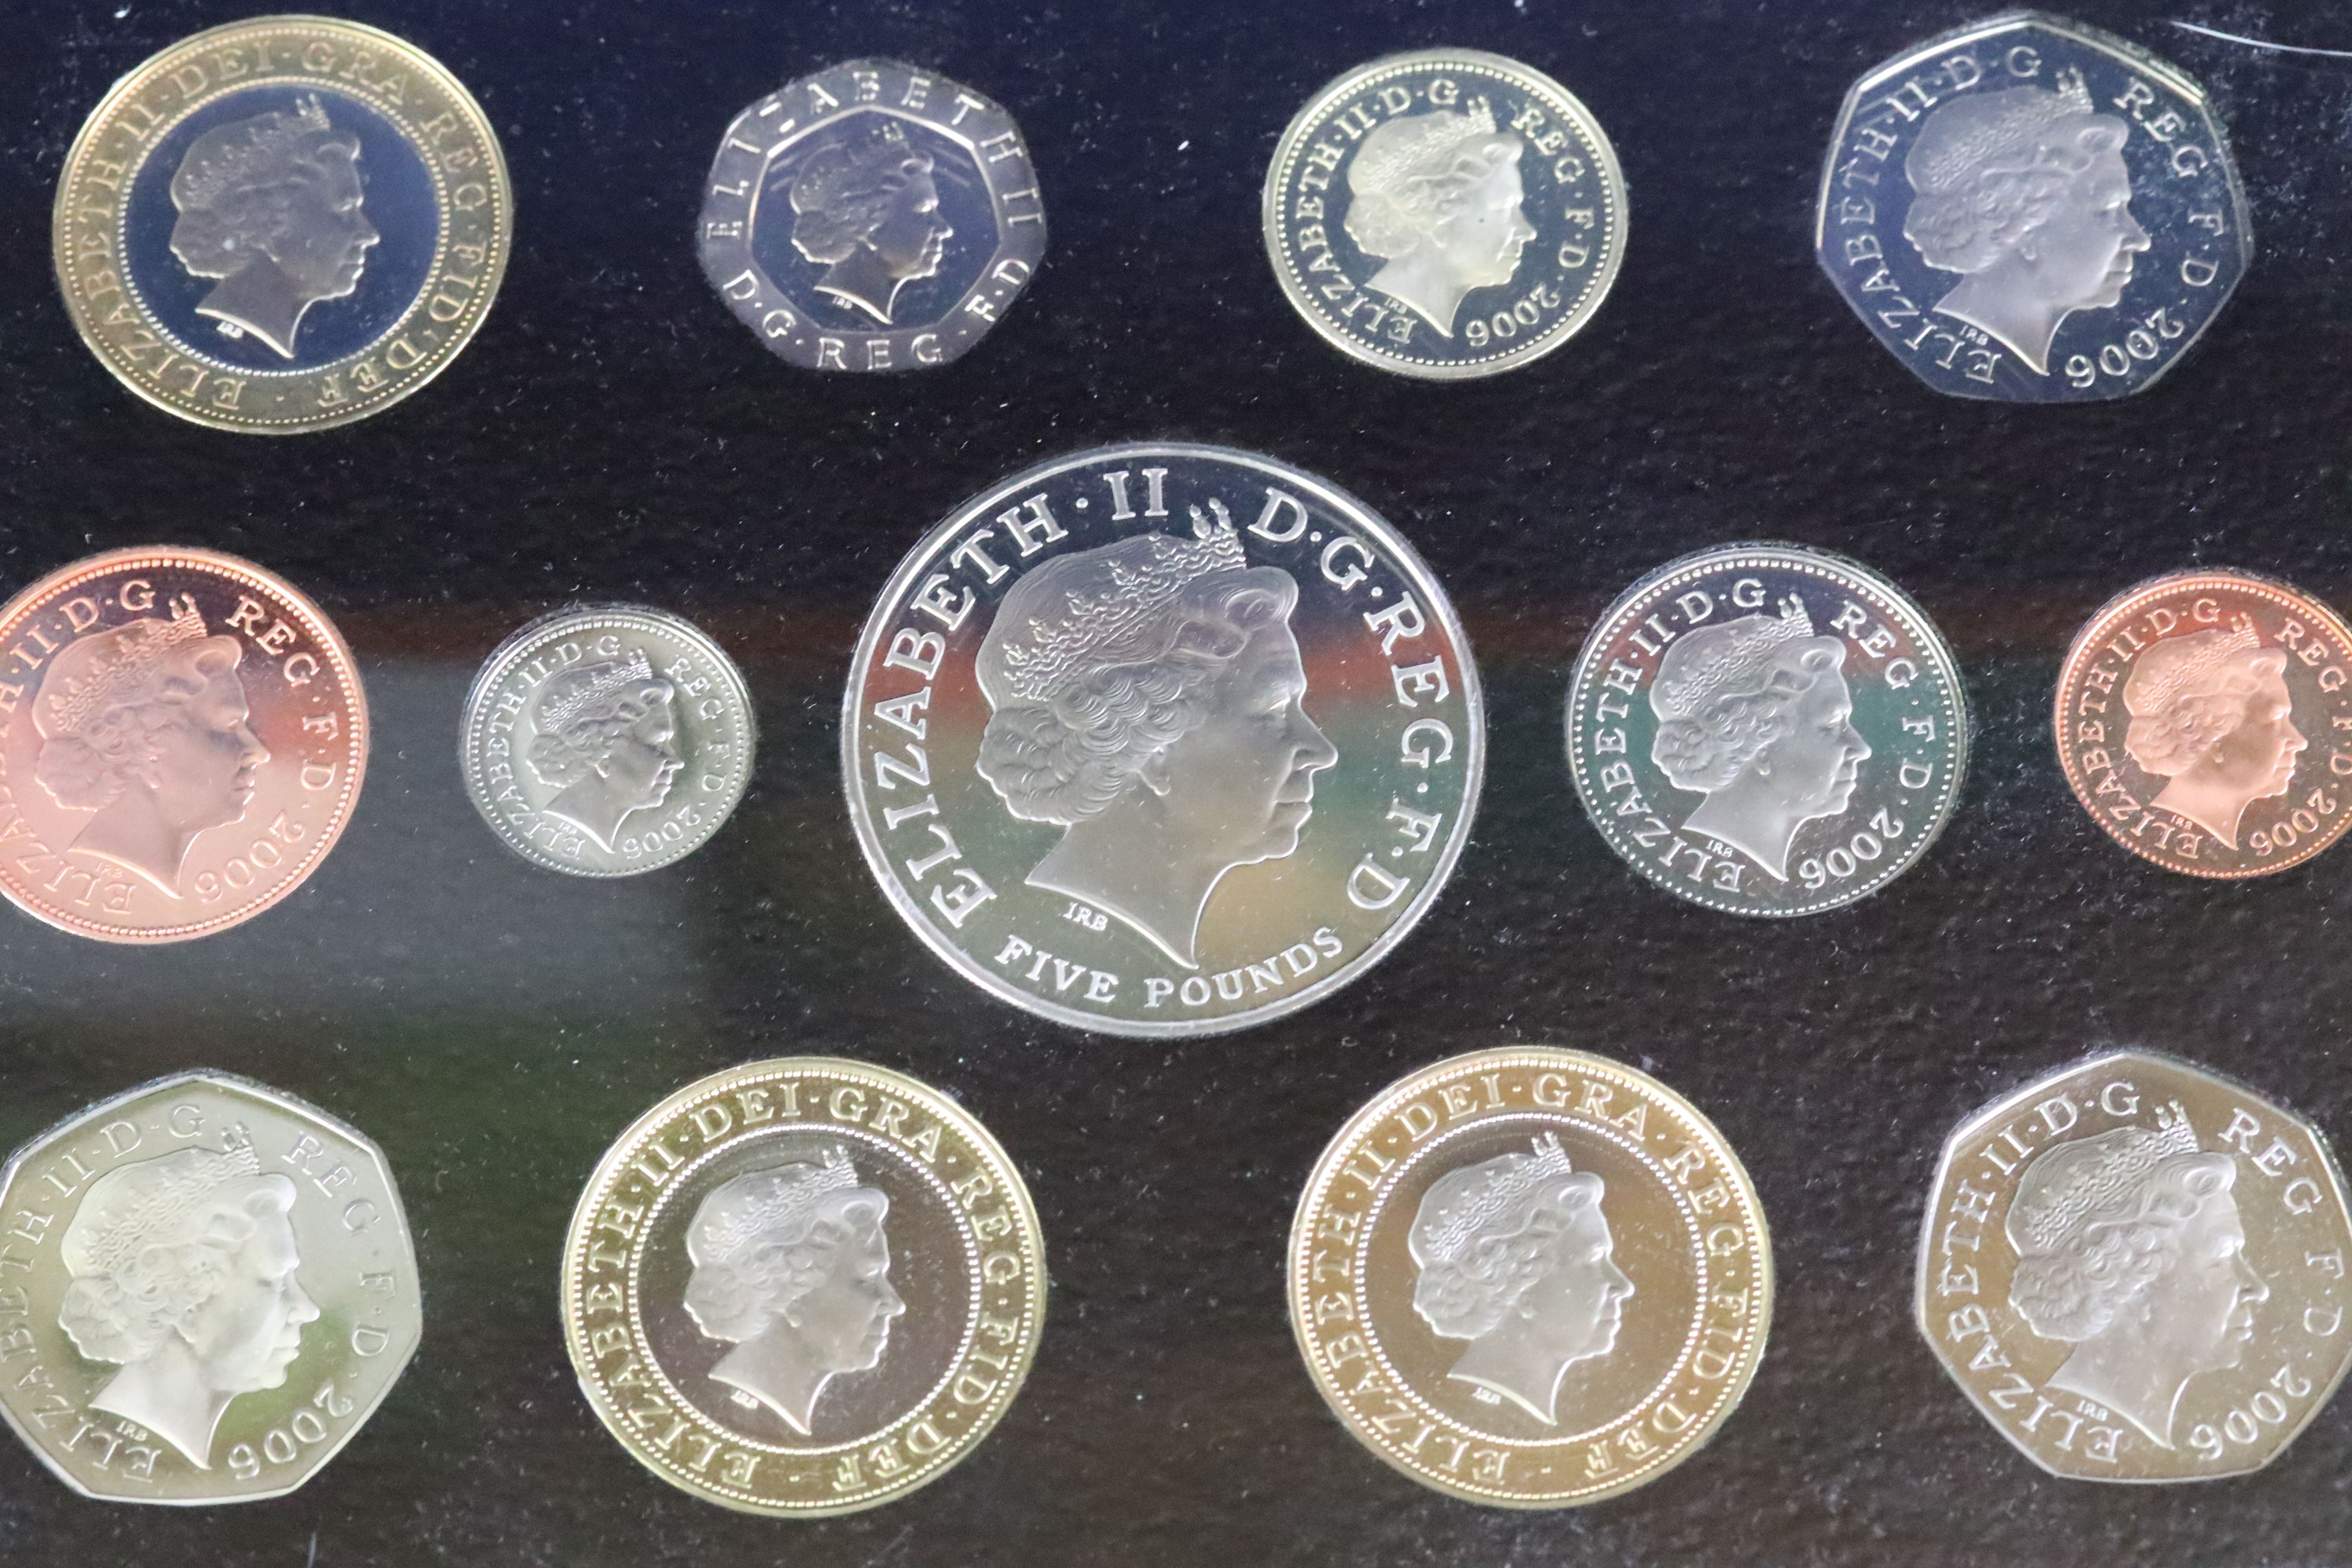 A Royal Mint United Kingdom 2006 Executive twelve coin proof set, set within wooden presentation - Image 3 of 5